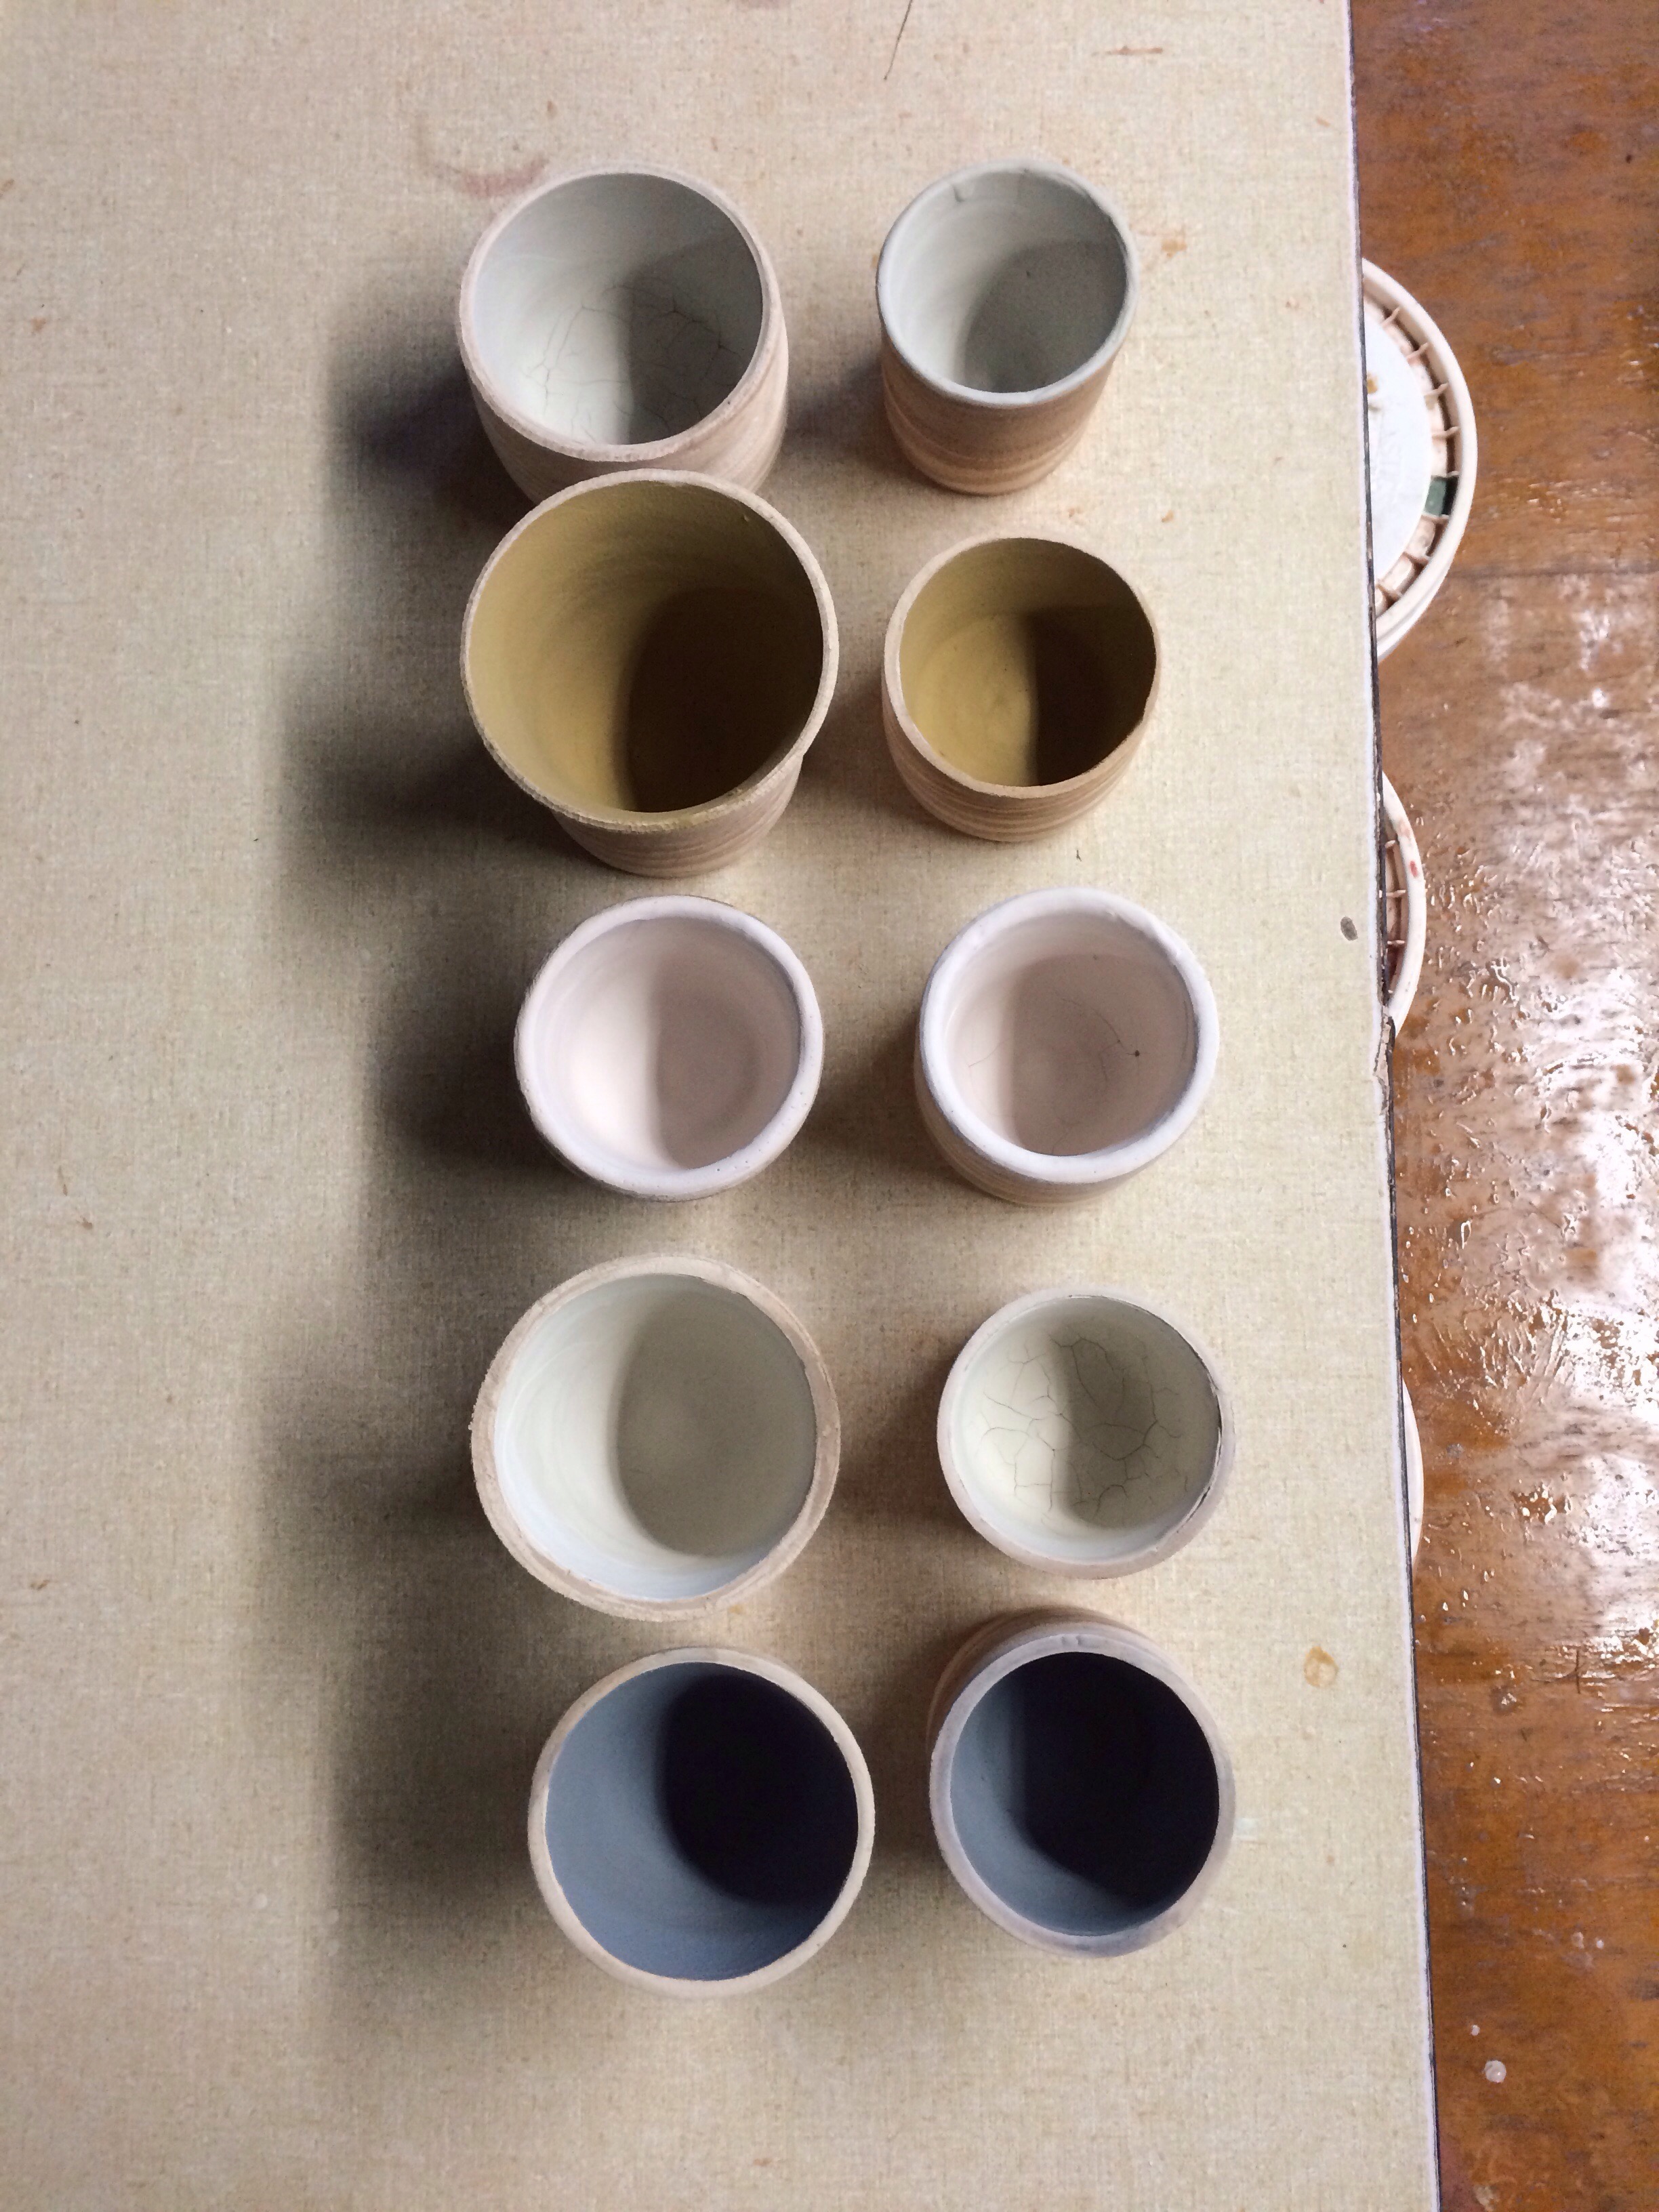 Marbled ceramic candle holders ready for the glaze kiln.